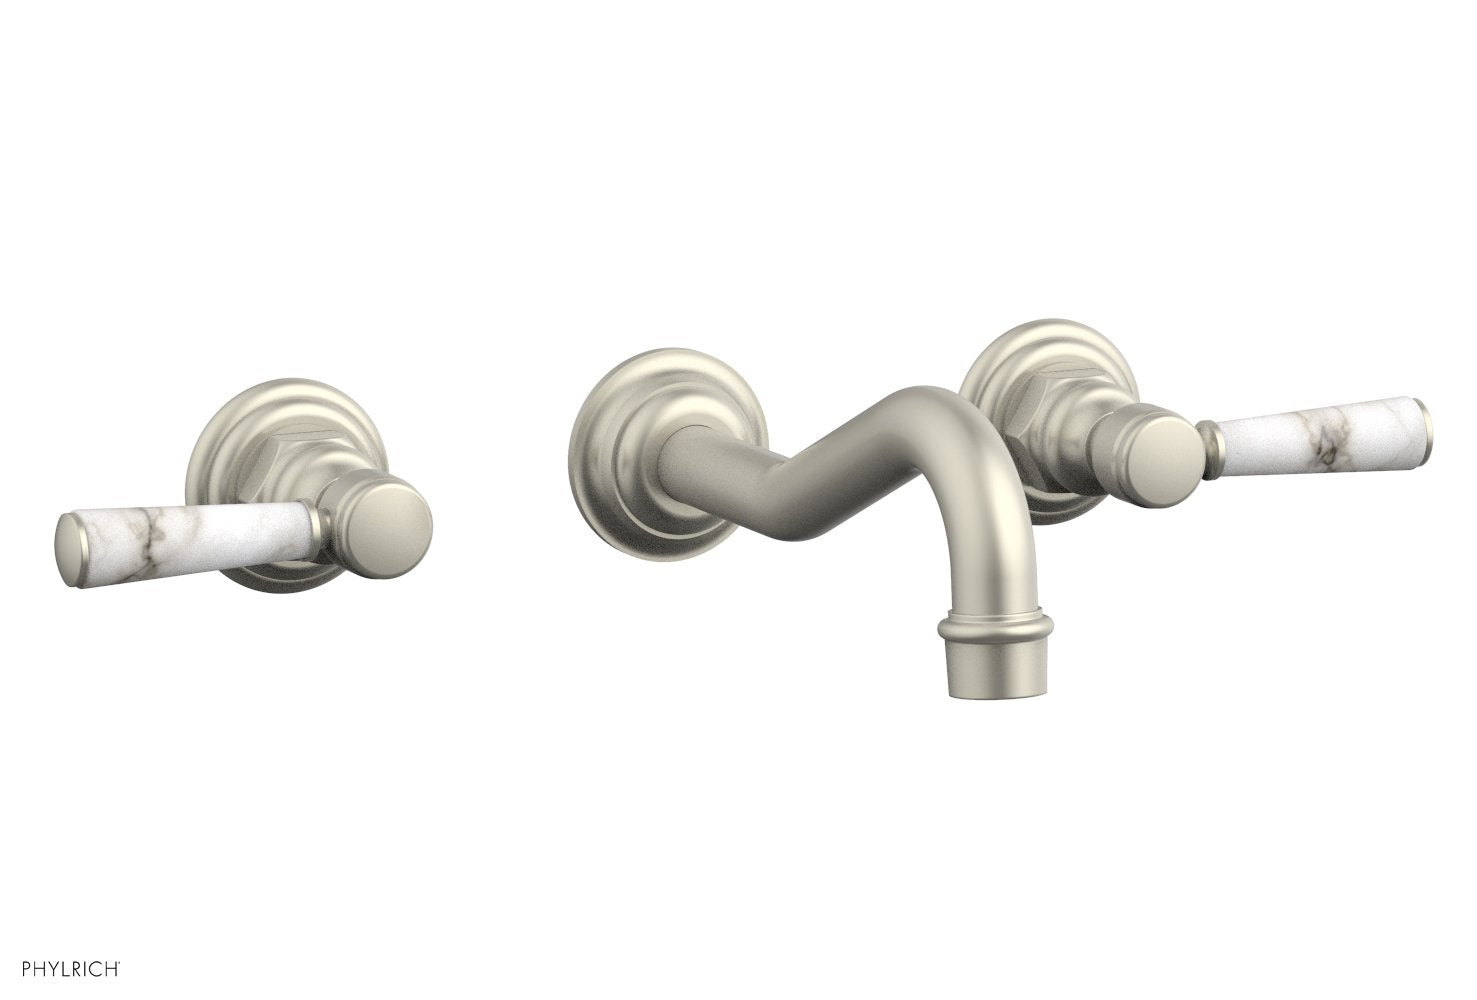 Phylrich HENRI Wall Lavatory Set - White Marble Lever Handles